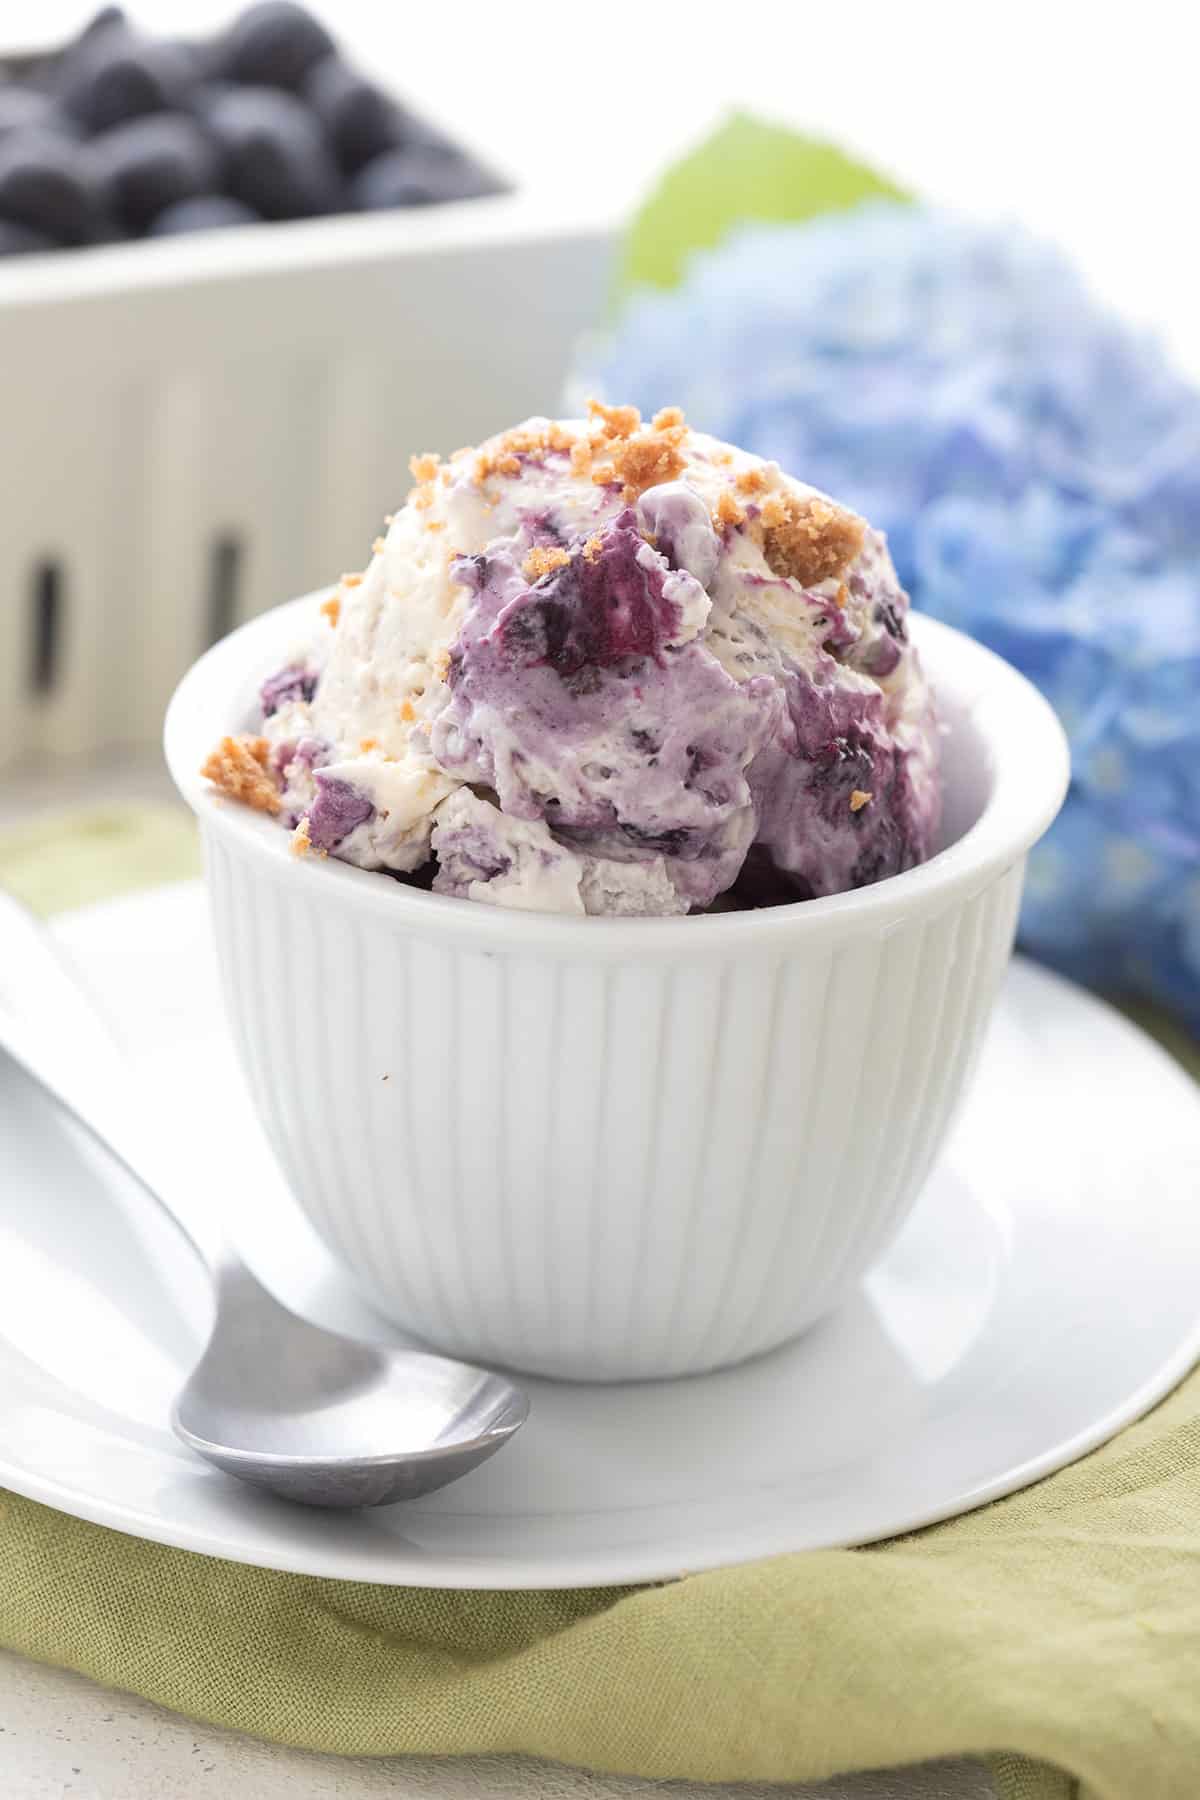 Keto Blueberry Ice Cream in a white dish over a green napkin, with blue hydrangeas in the background.